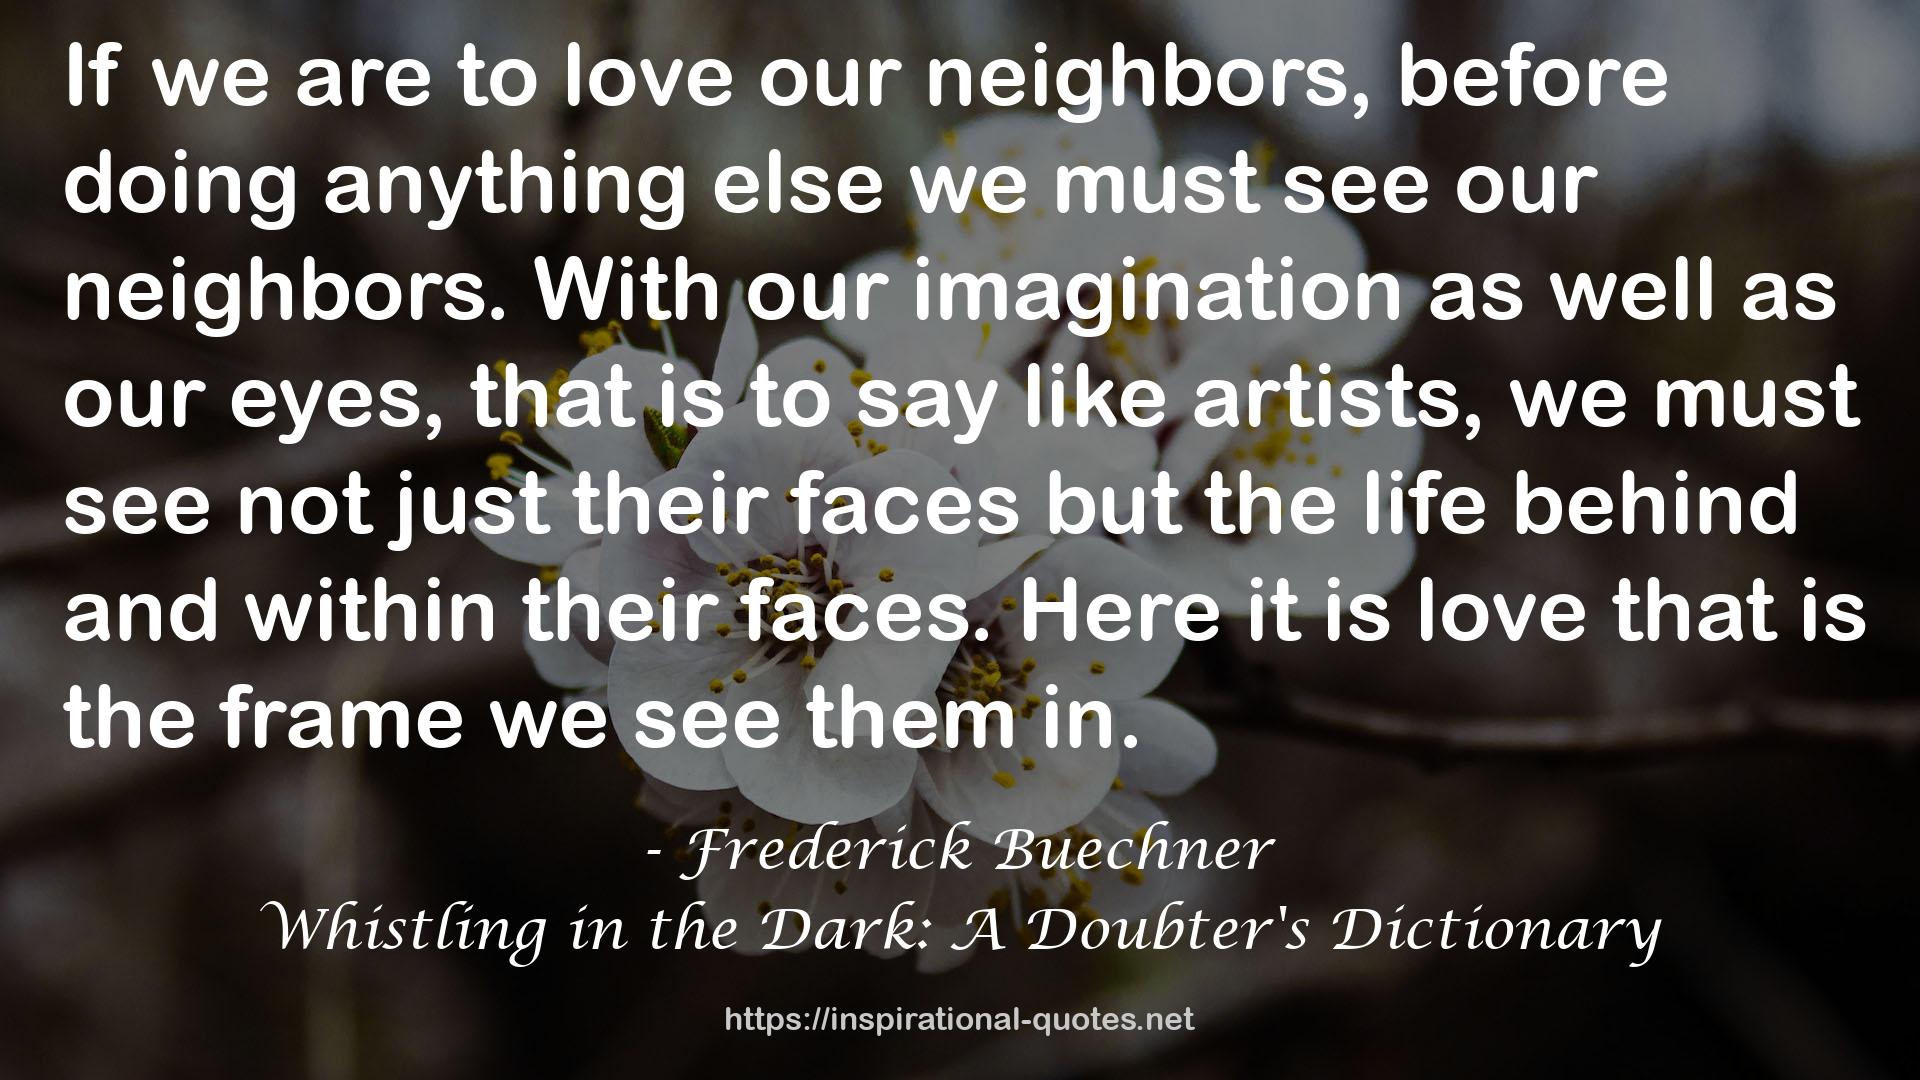 Frederick Buechner QUOTES